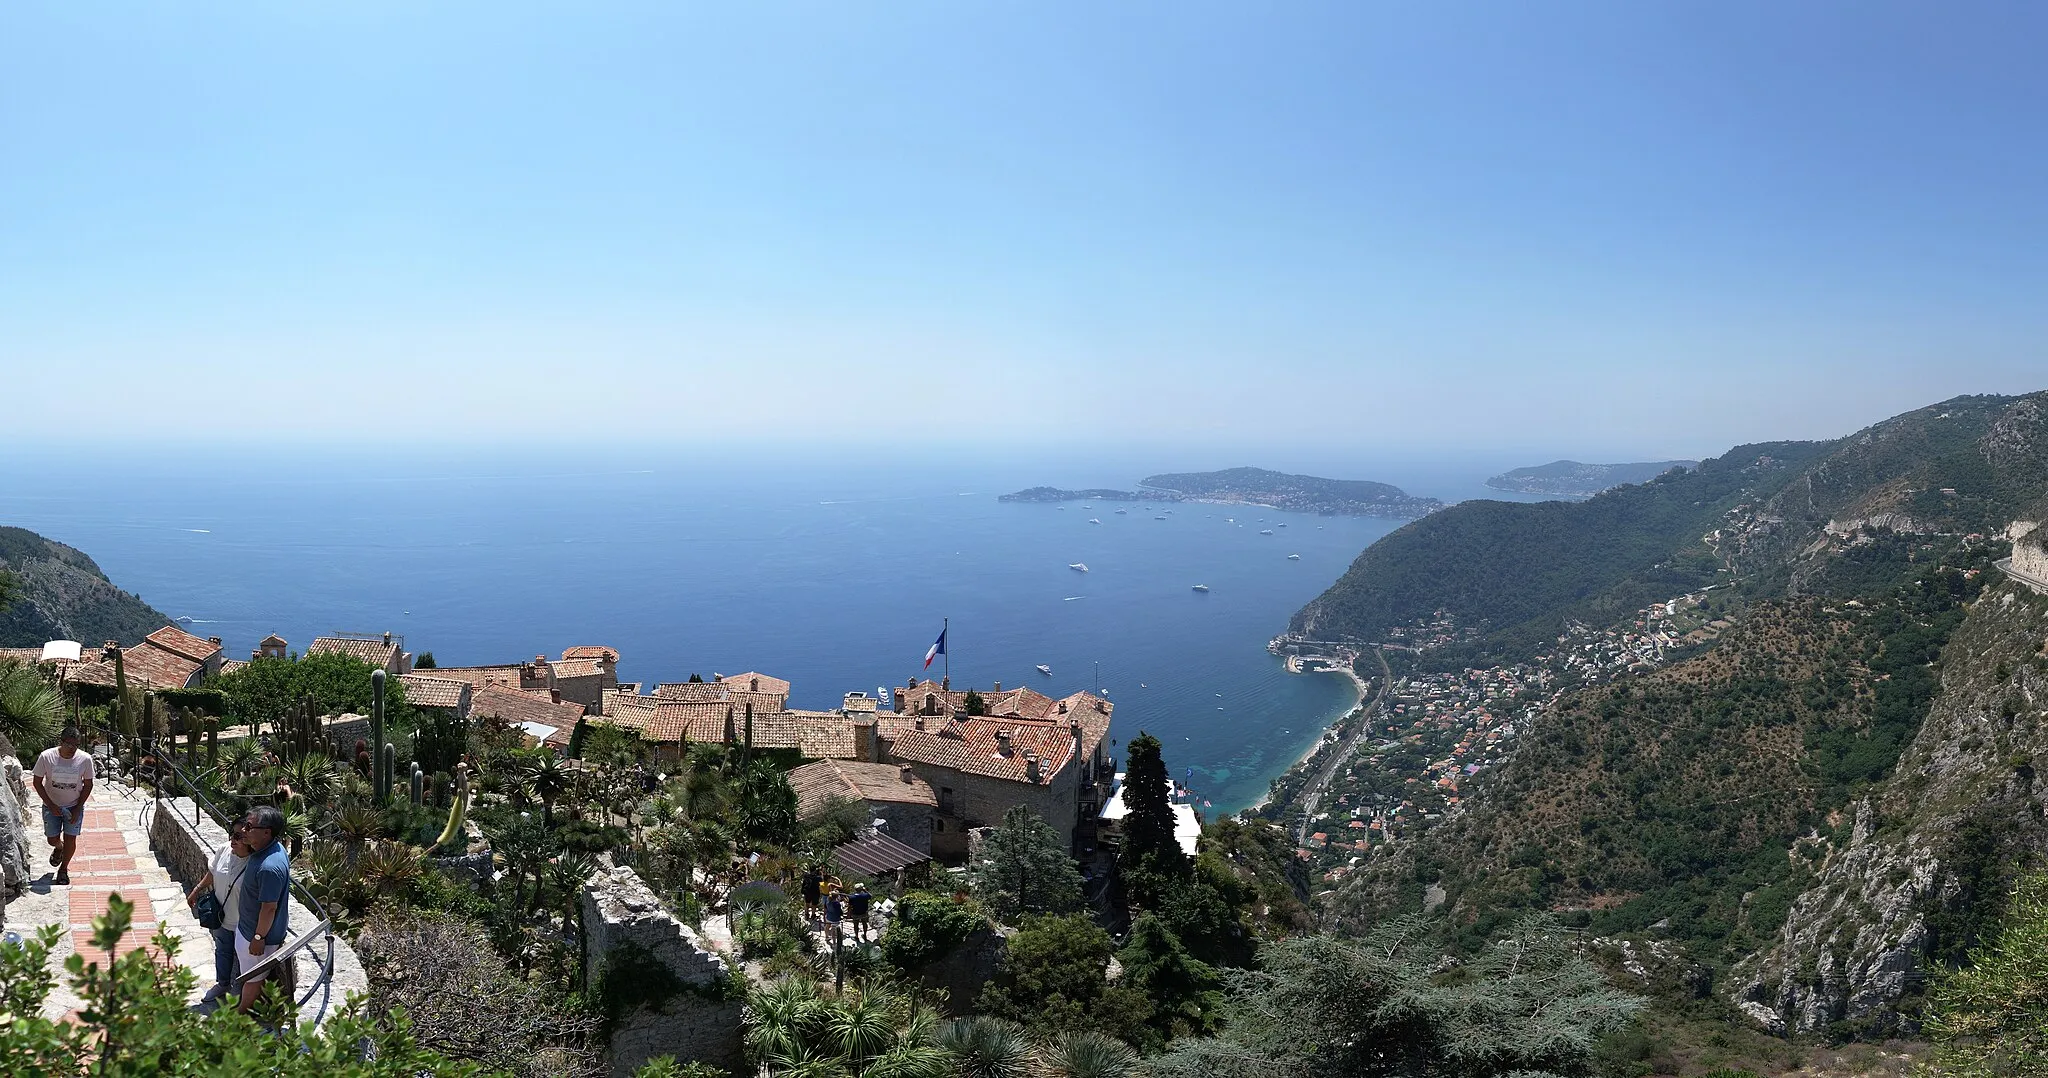 Photo showing: Èze with its Jardin d'Eze and its village Èze-bord-de-Mer as seen from the Château d'Èze. In the distance the peninsula Cap Ferrat can be seen.